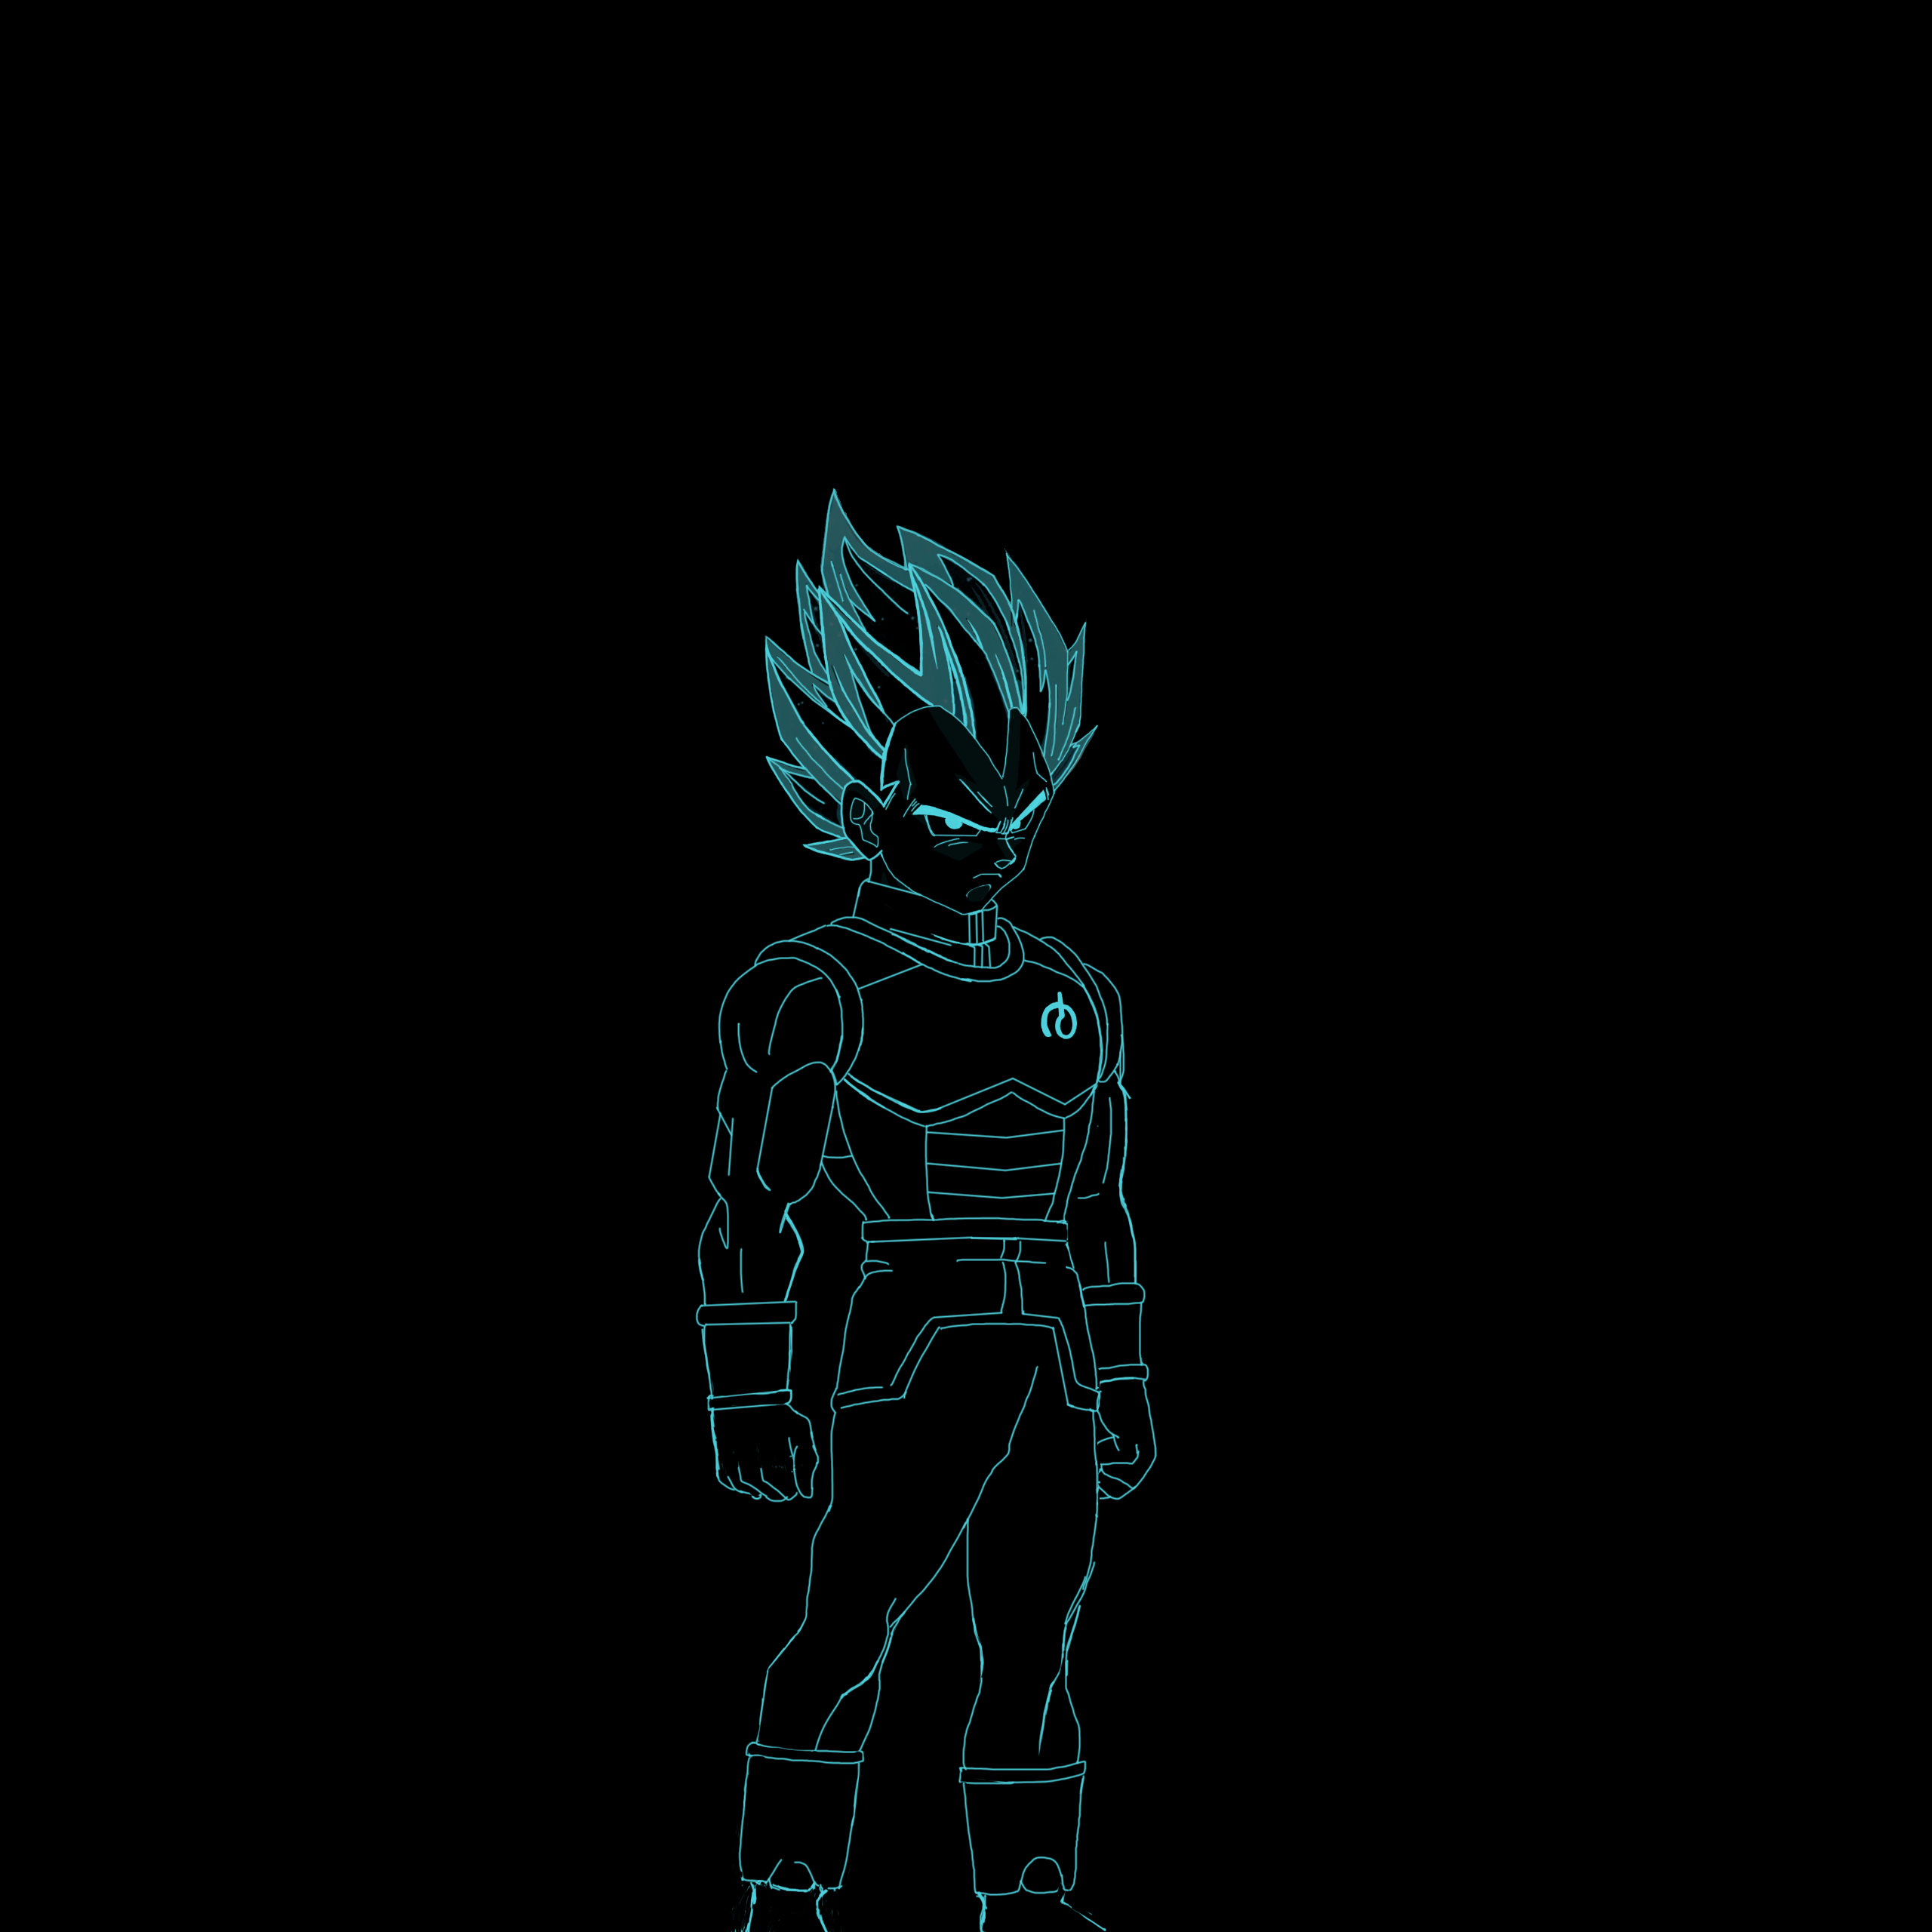 I Made A Wallpaper Of Ssgss Vegeta For My Nexus 6p In Photoshop